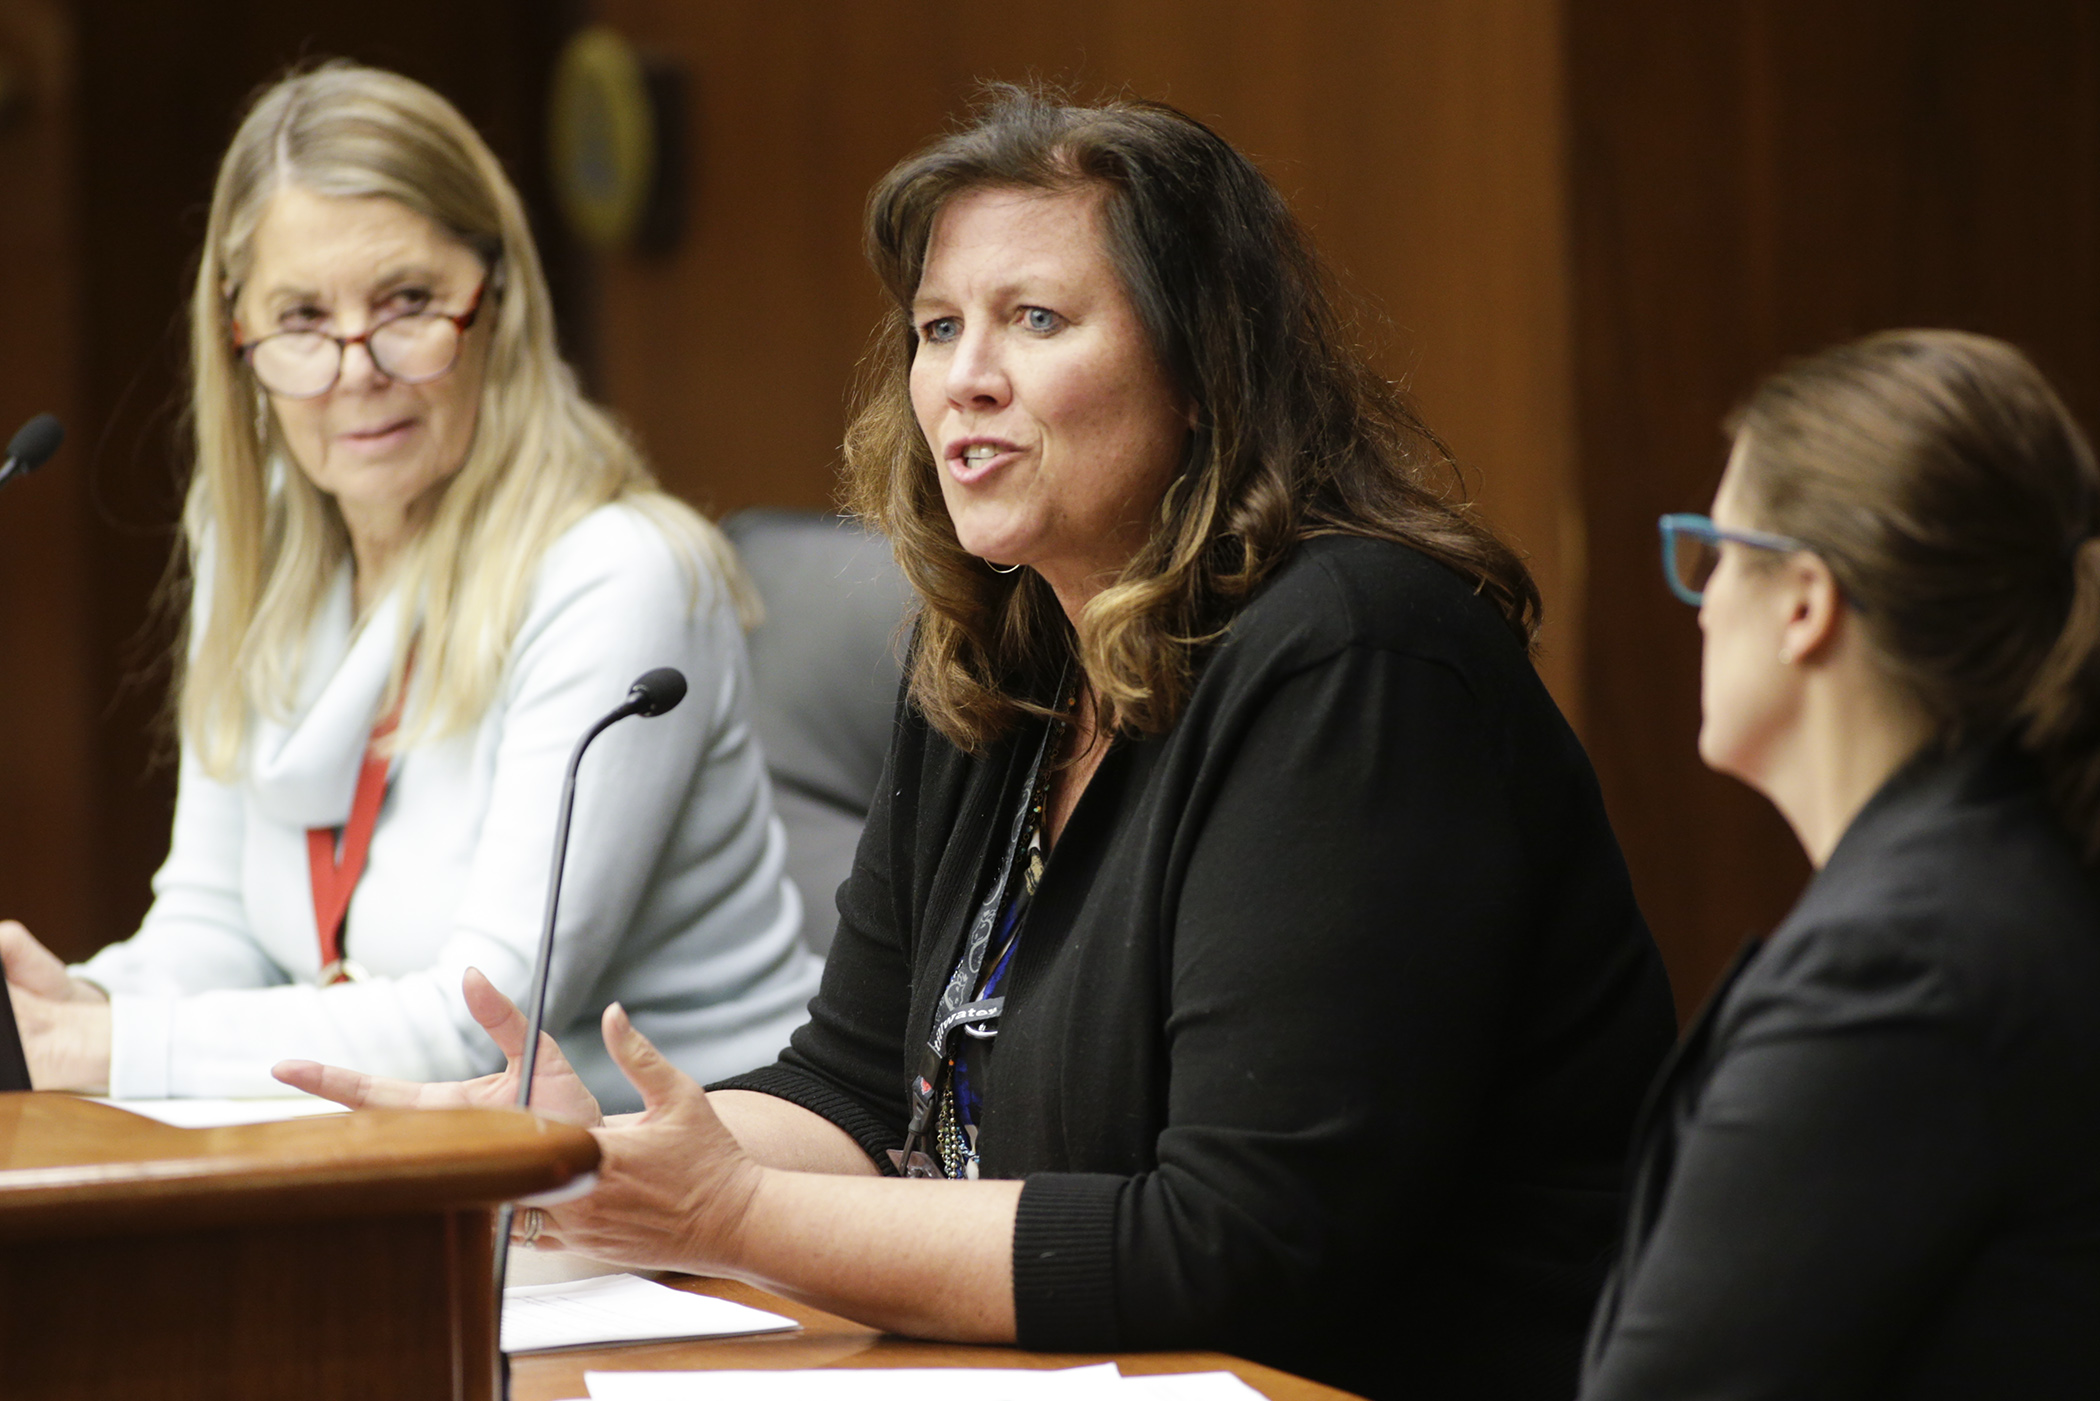 Stillwater Area Schools Superintendent Denise Pontrelli testifies before the House Education Policy Committee on HF1982, sponsored by Rep. Shelly Christensen, left. Photo by Paul Battaglia